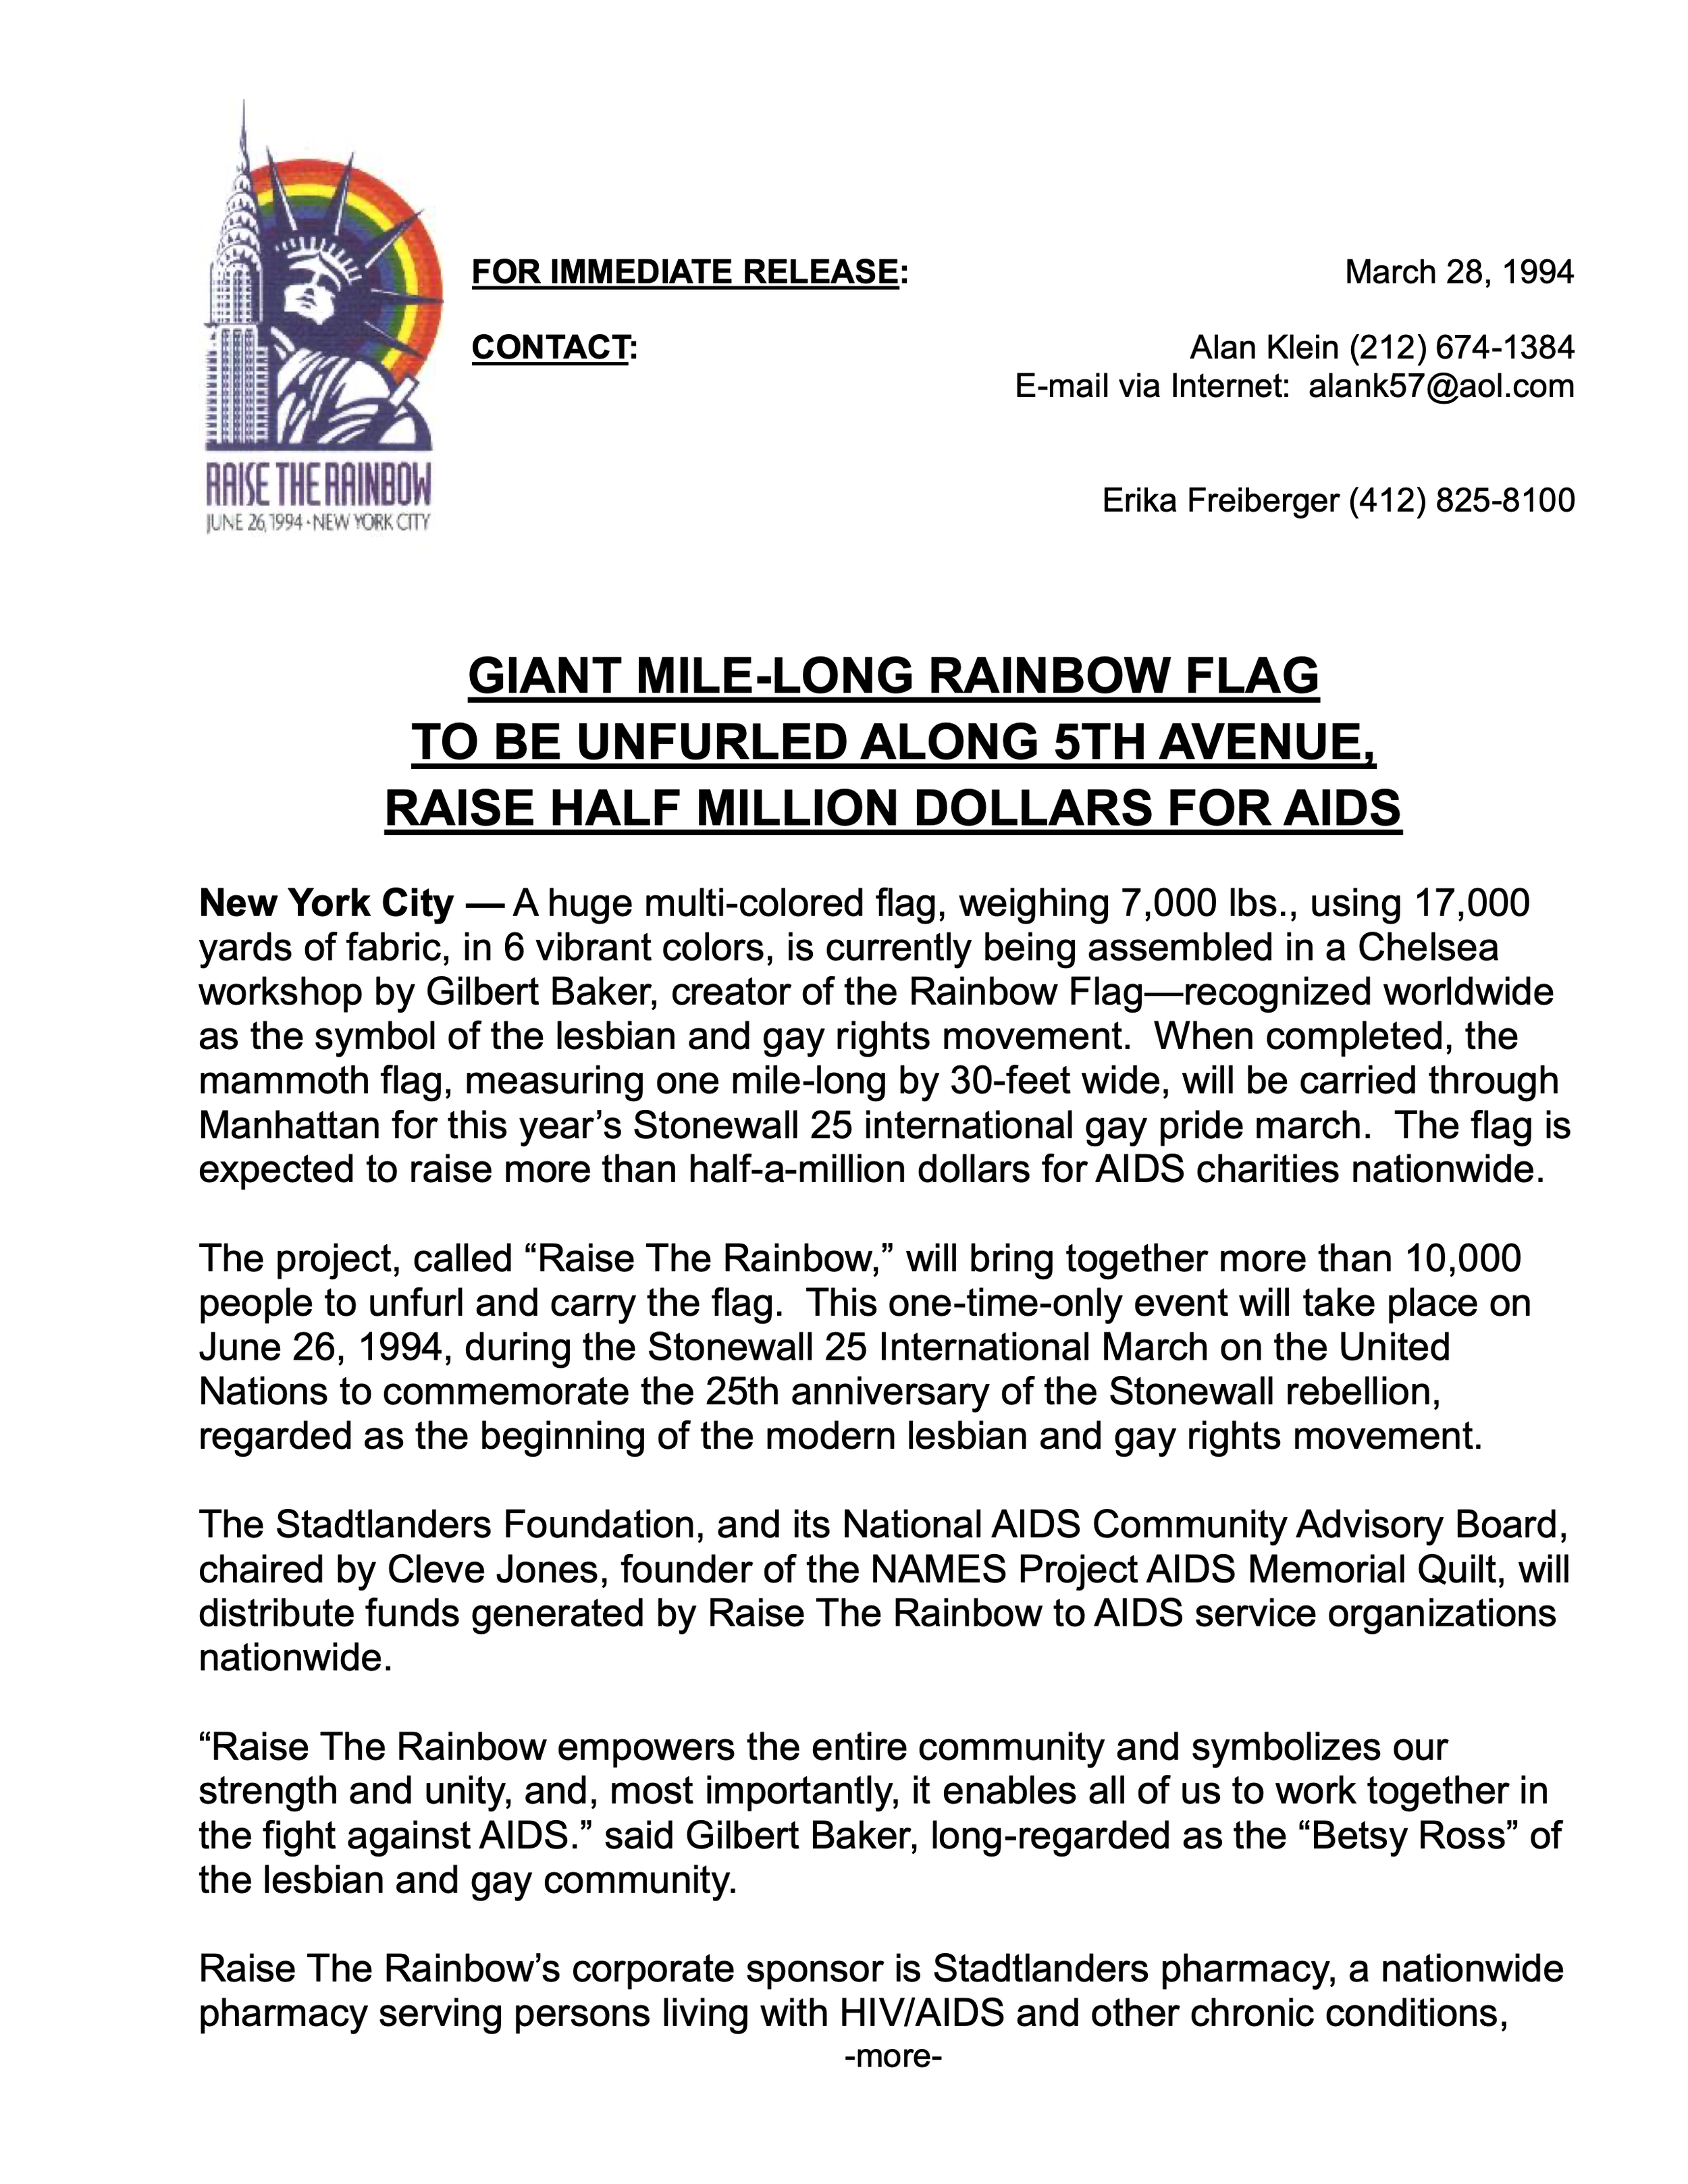 Giant Mile-Long Rainbow Flag To Be Unfurled Along 5th Avenue, Raise Half Million Dollars For AIDS